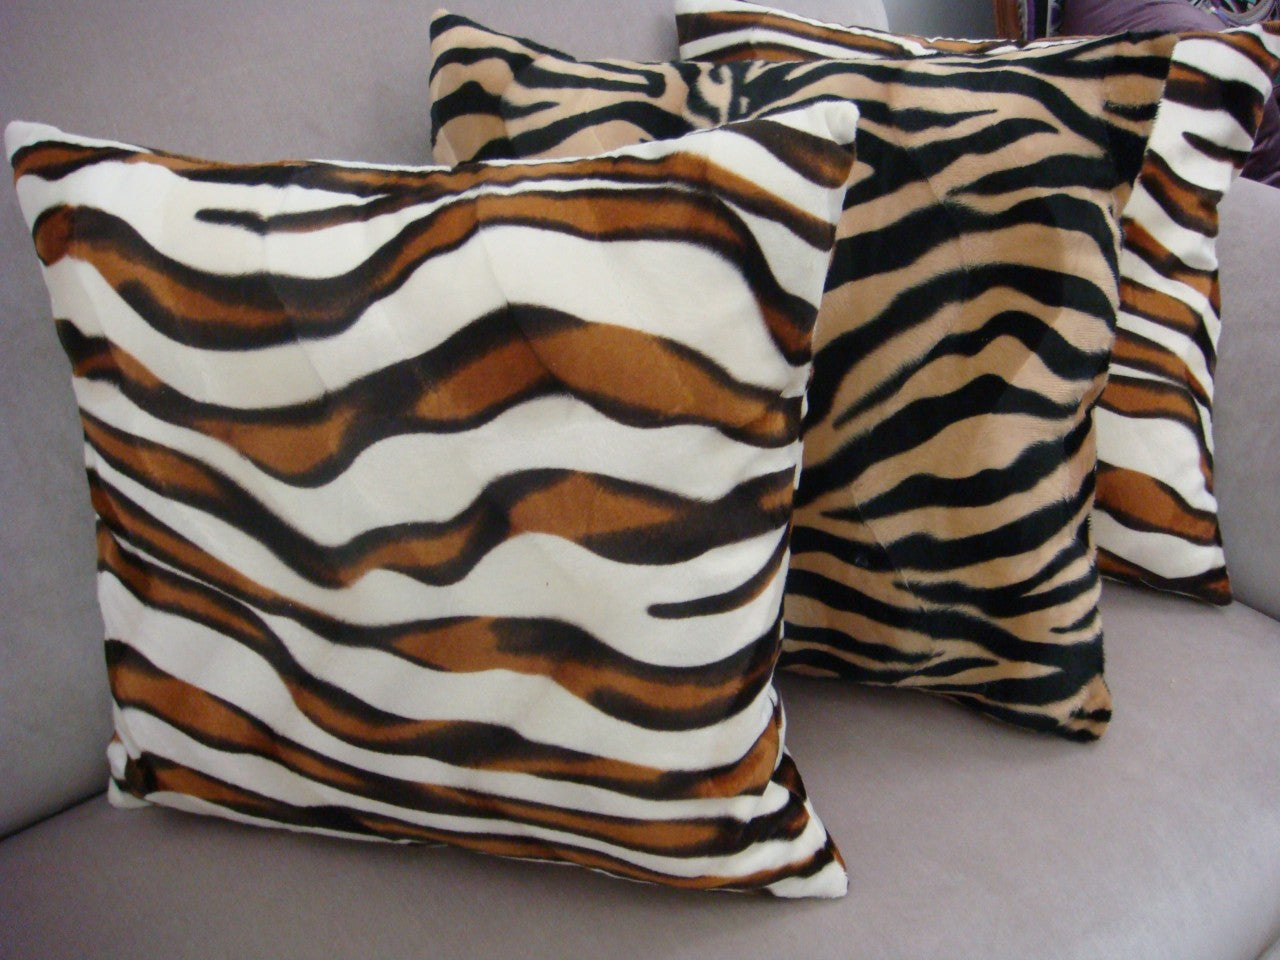 Zebra Print Pillow Cover in Gold/Brown